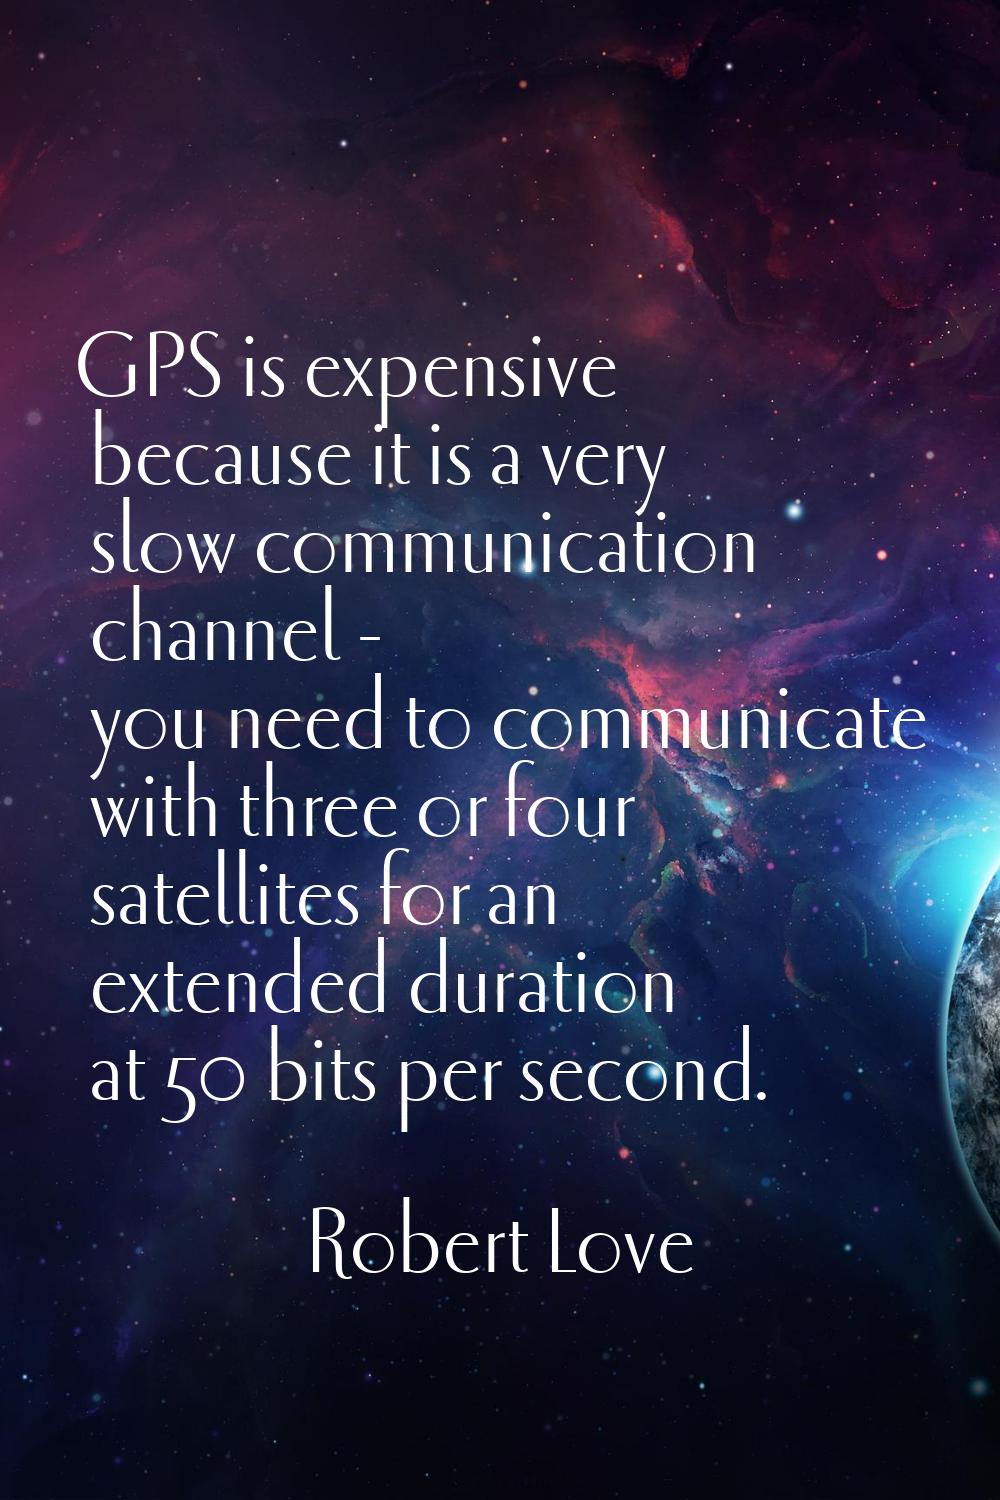 GPS is expensive because it is a very slow communication channel - you need to communicate with thr